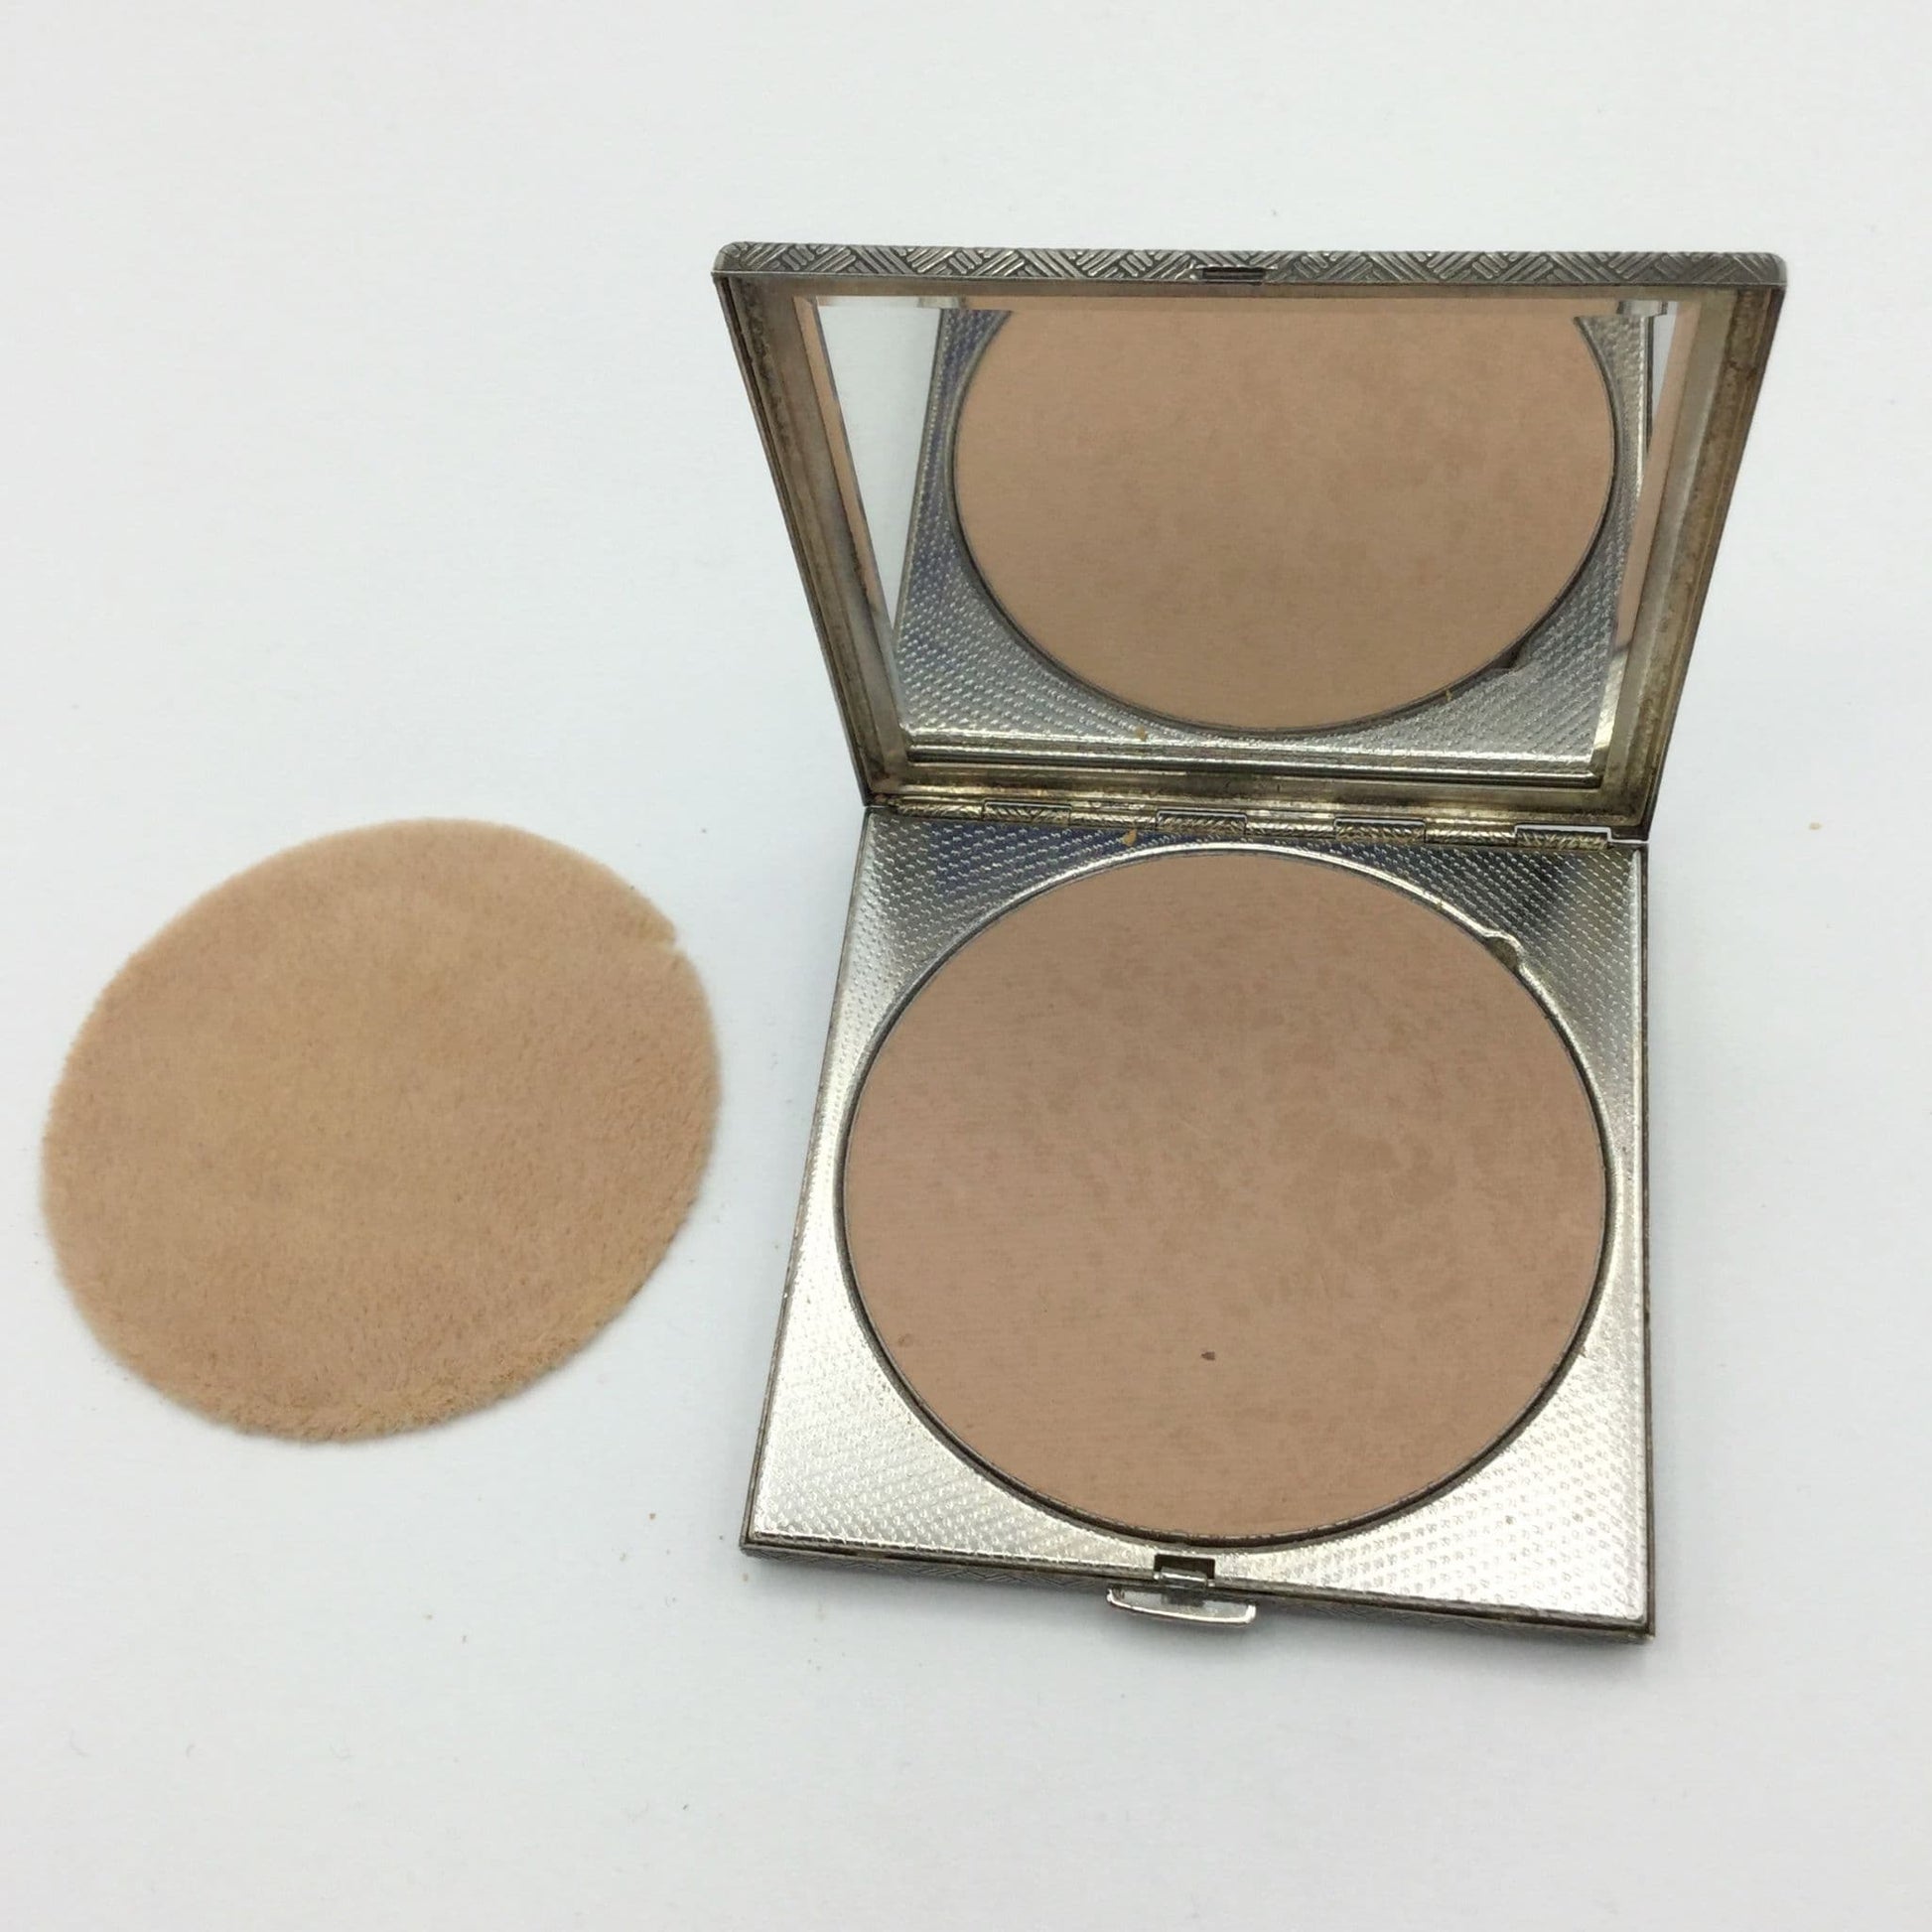 open mirror compact showing powder, applicator sponge and mirror